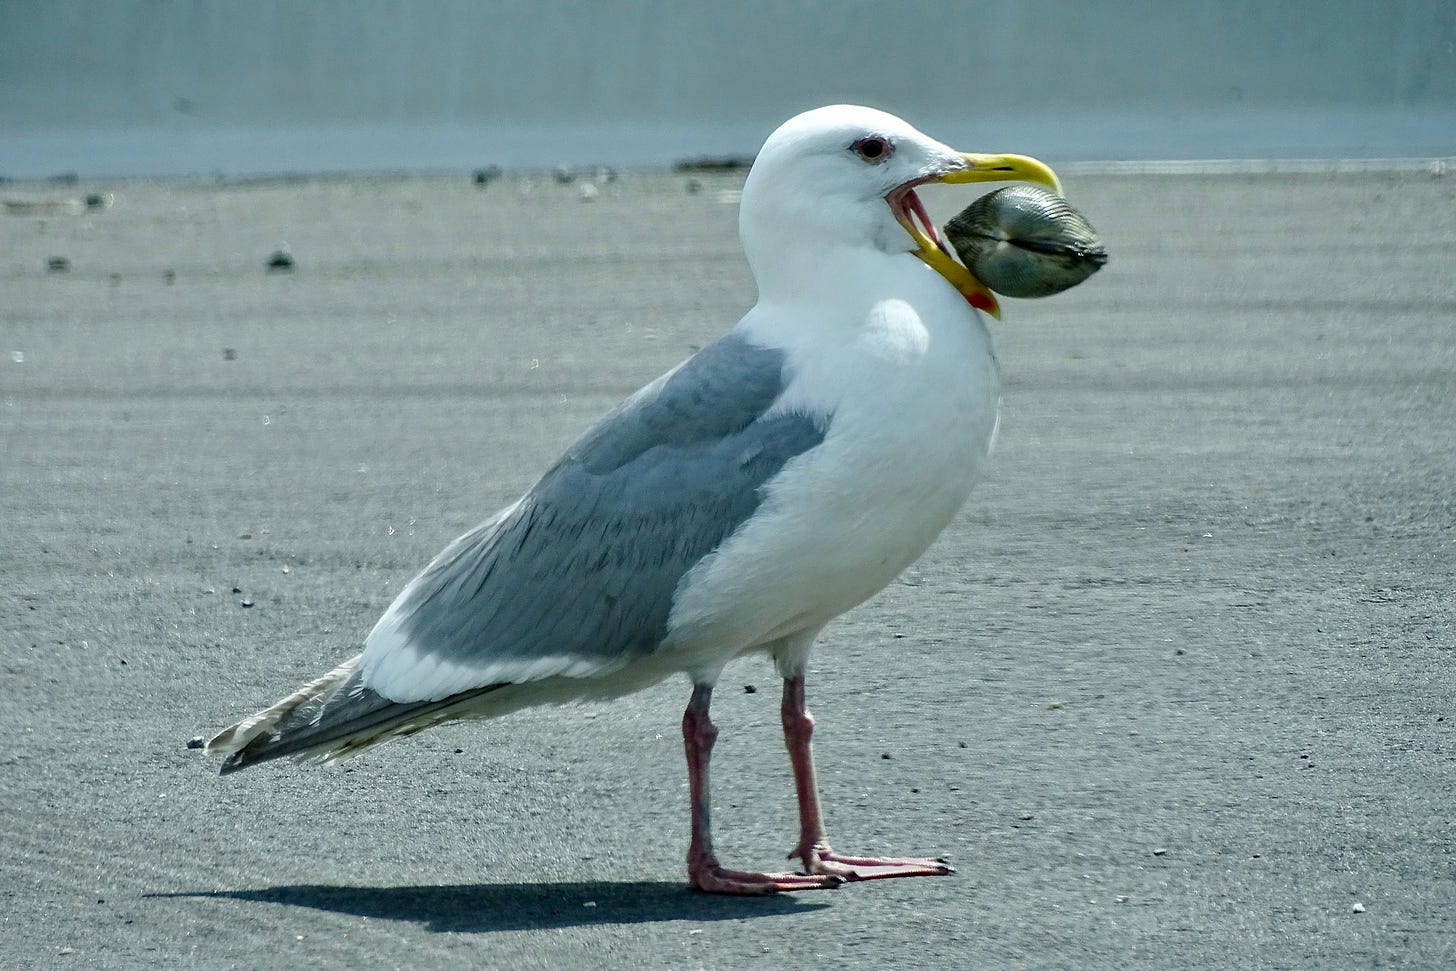 A seagull holding a clam or mussel in its beak.